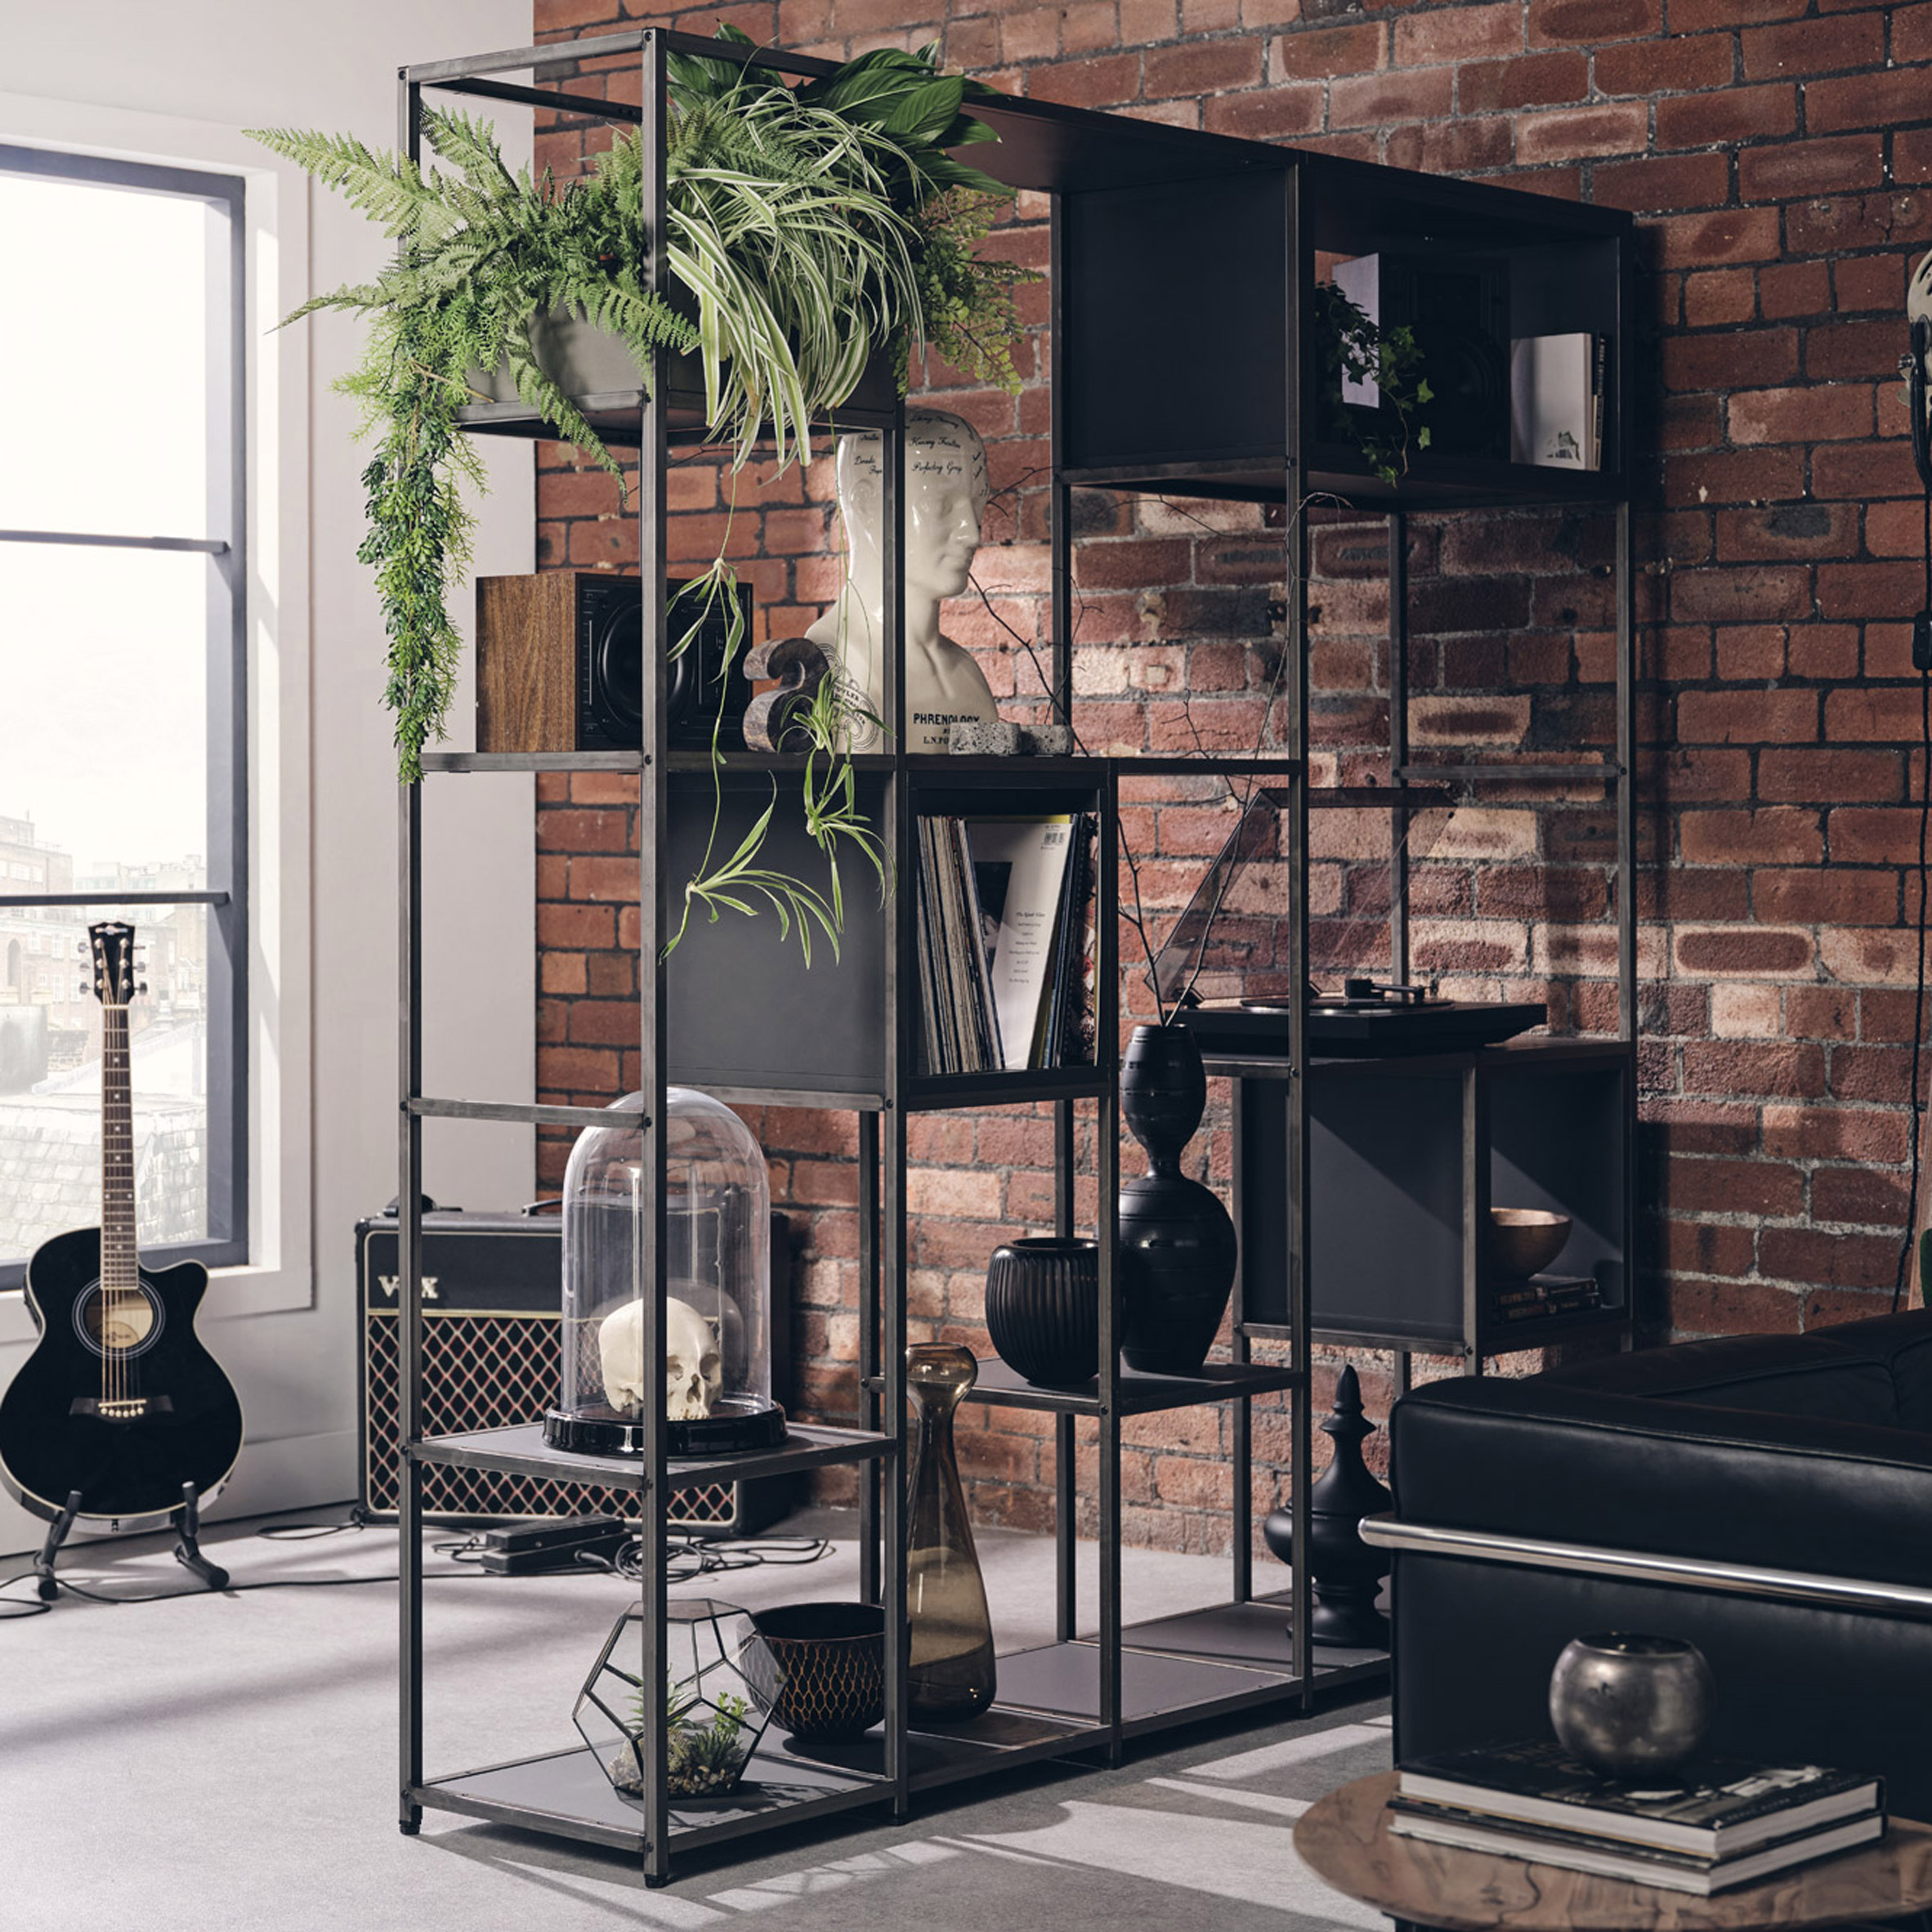 Black Shelved Modular Furniture used as a wall separator in a living room